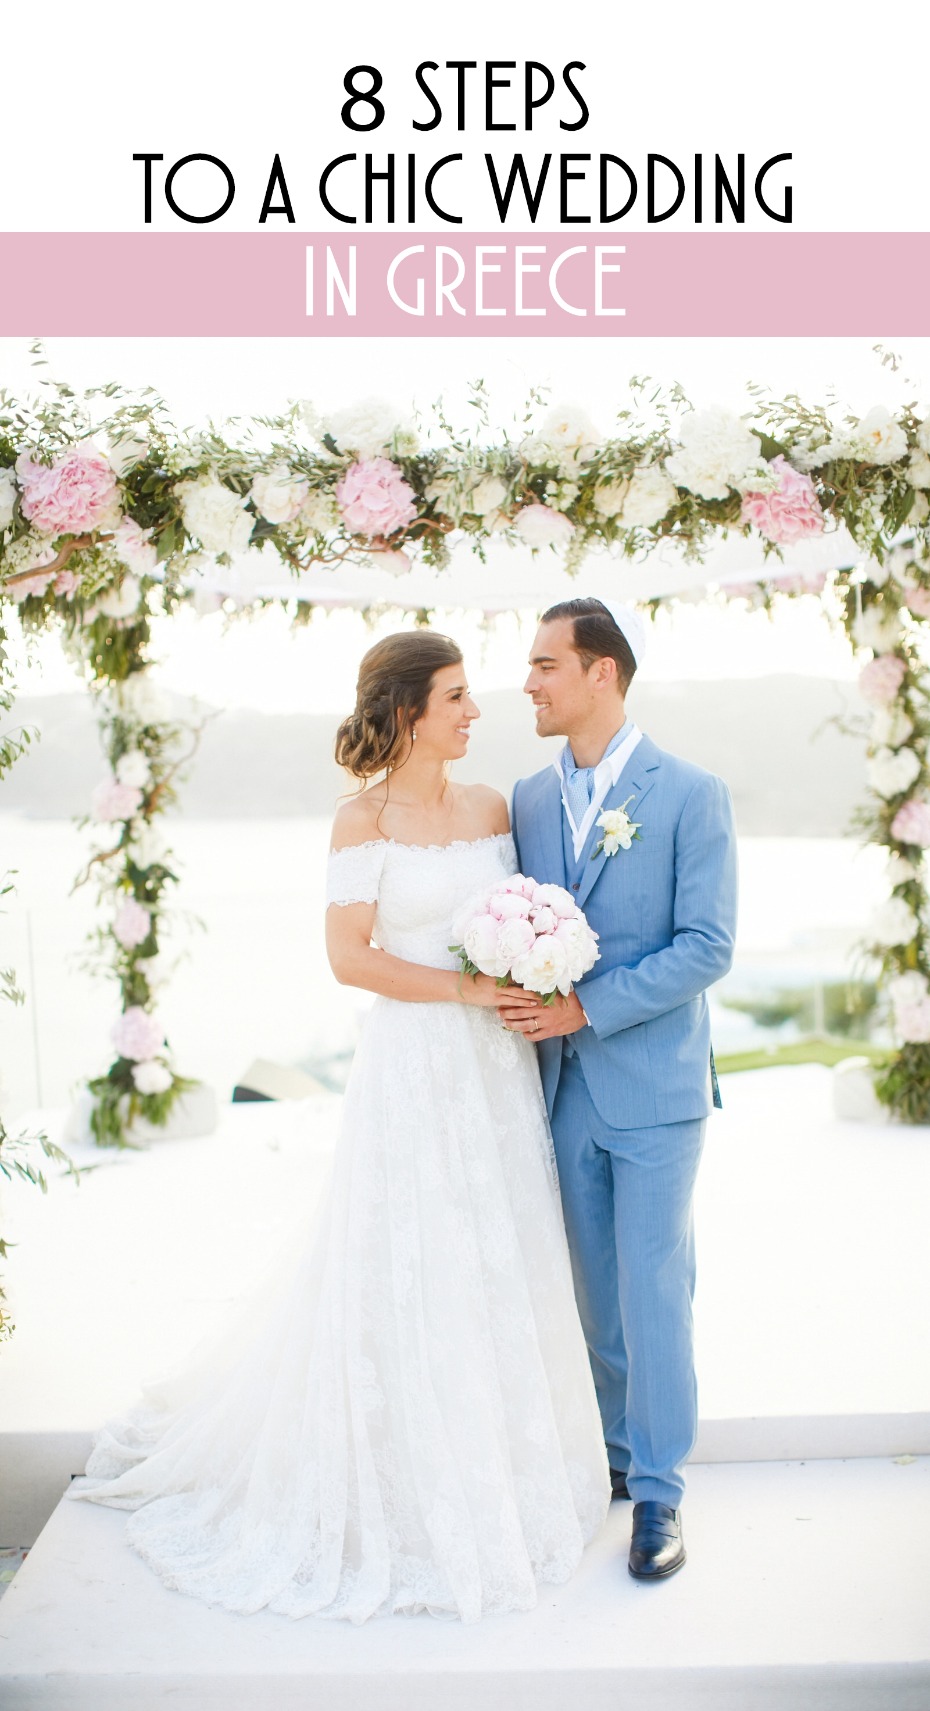 8 steps to a chic wedding in greece